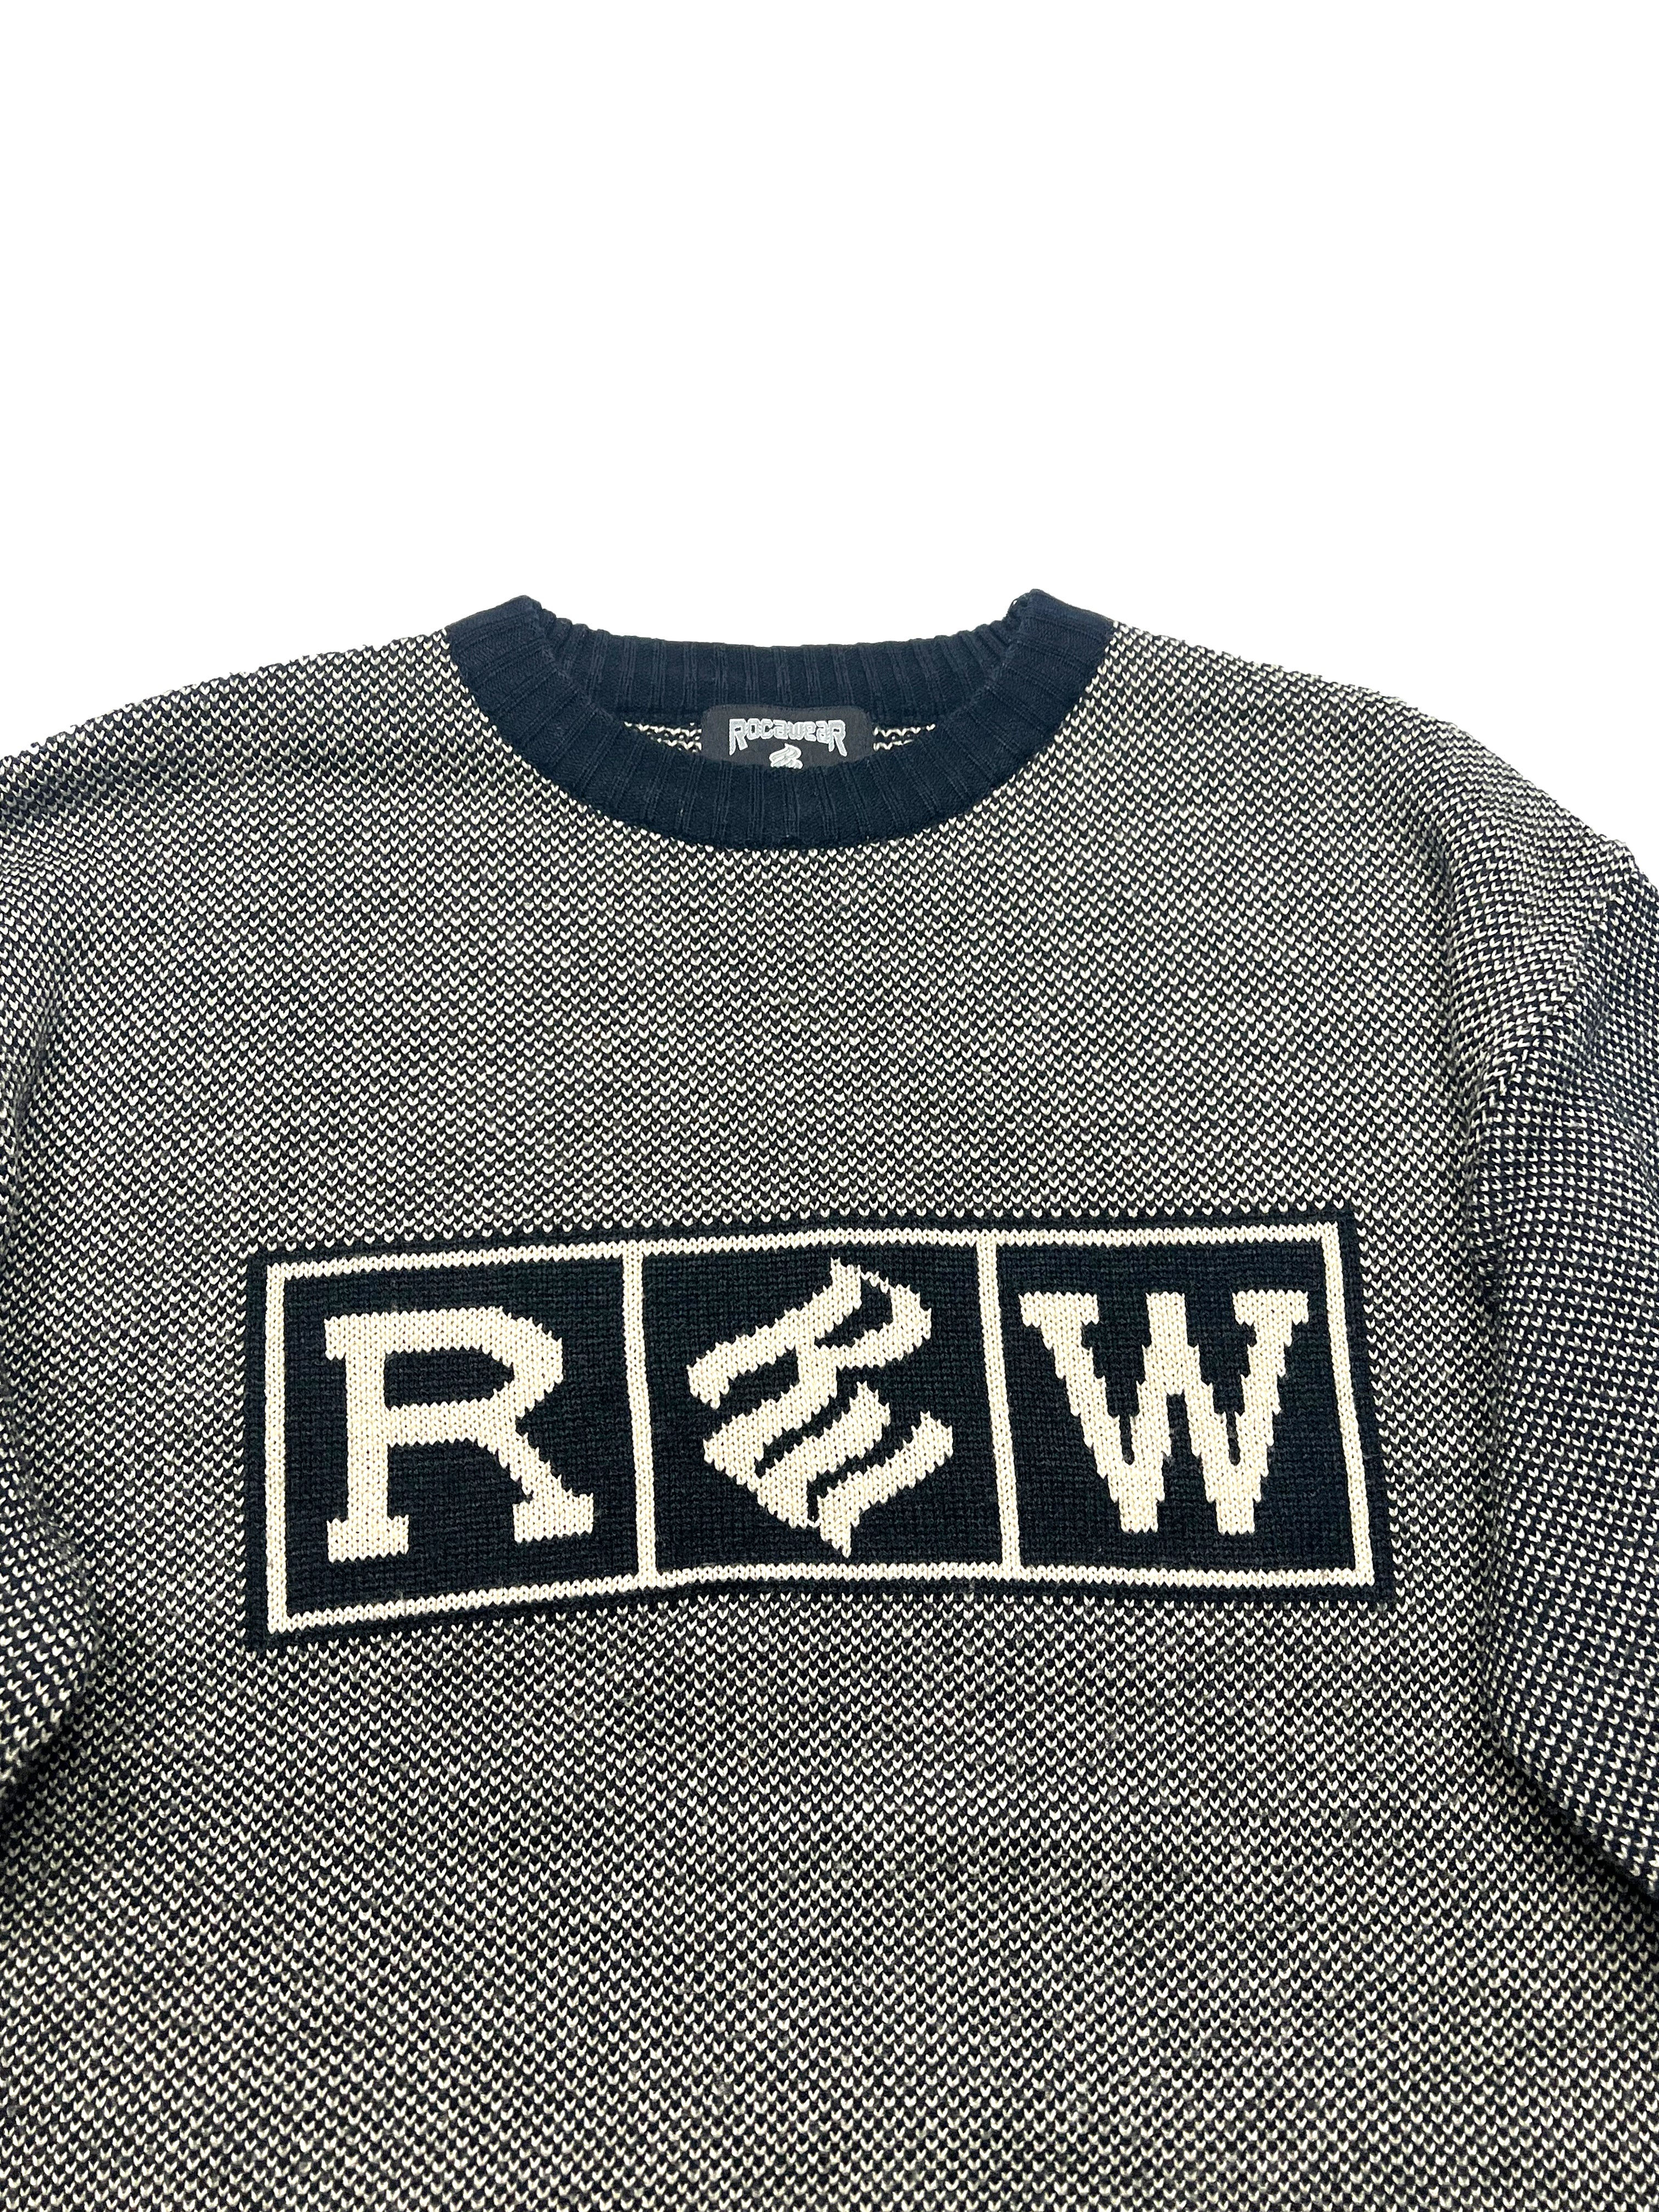 Rocawear Grey Spell Out Knit Jumper 90's